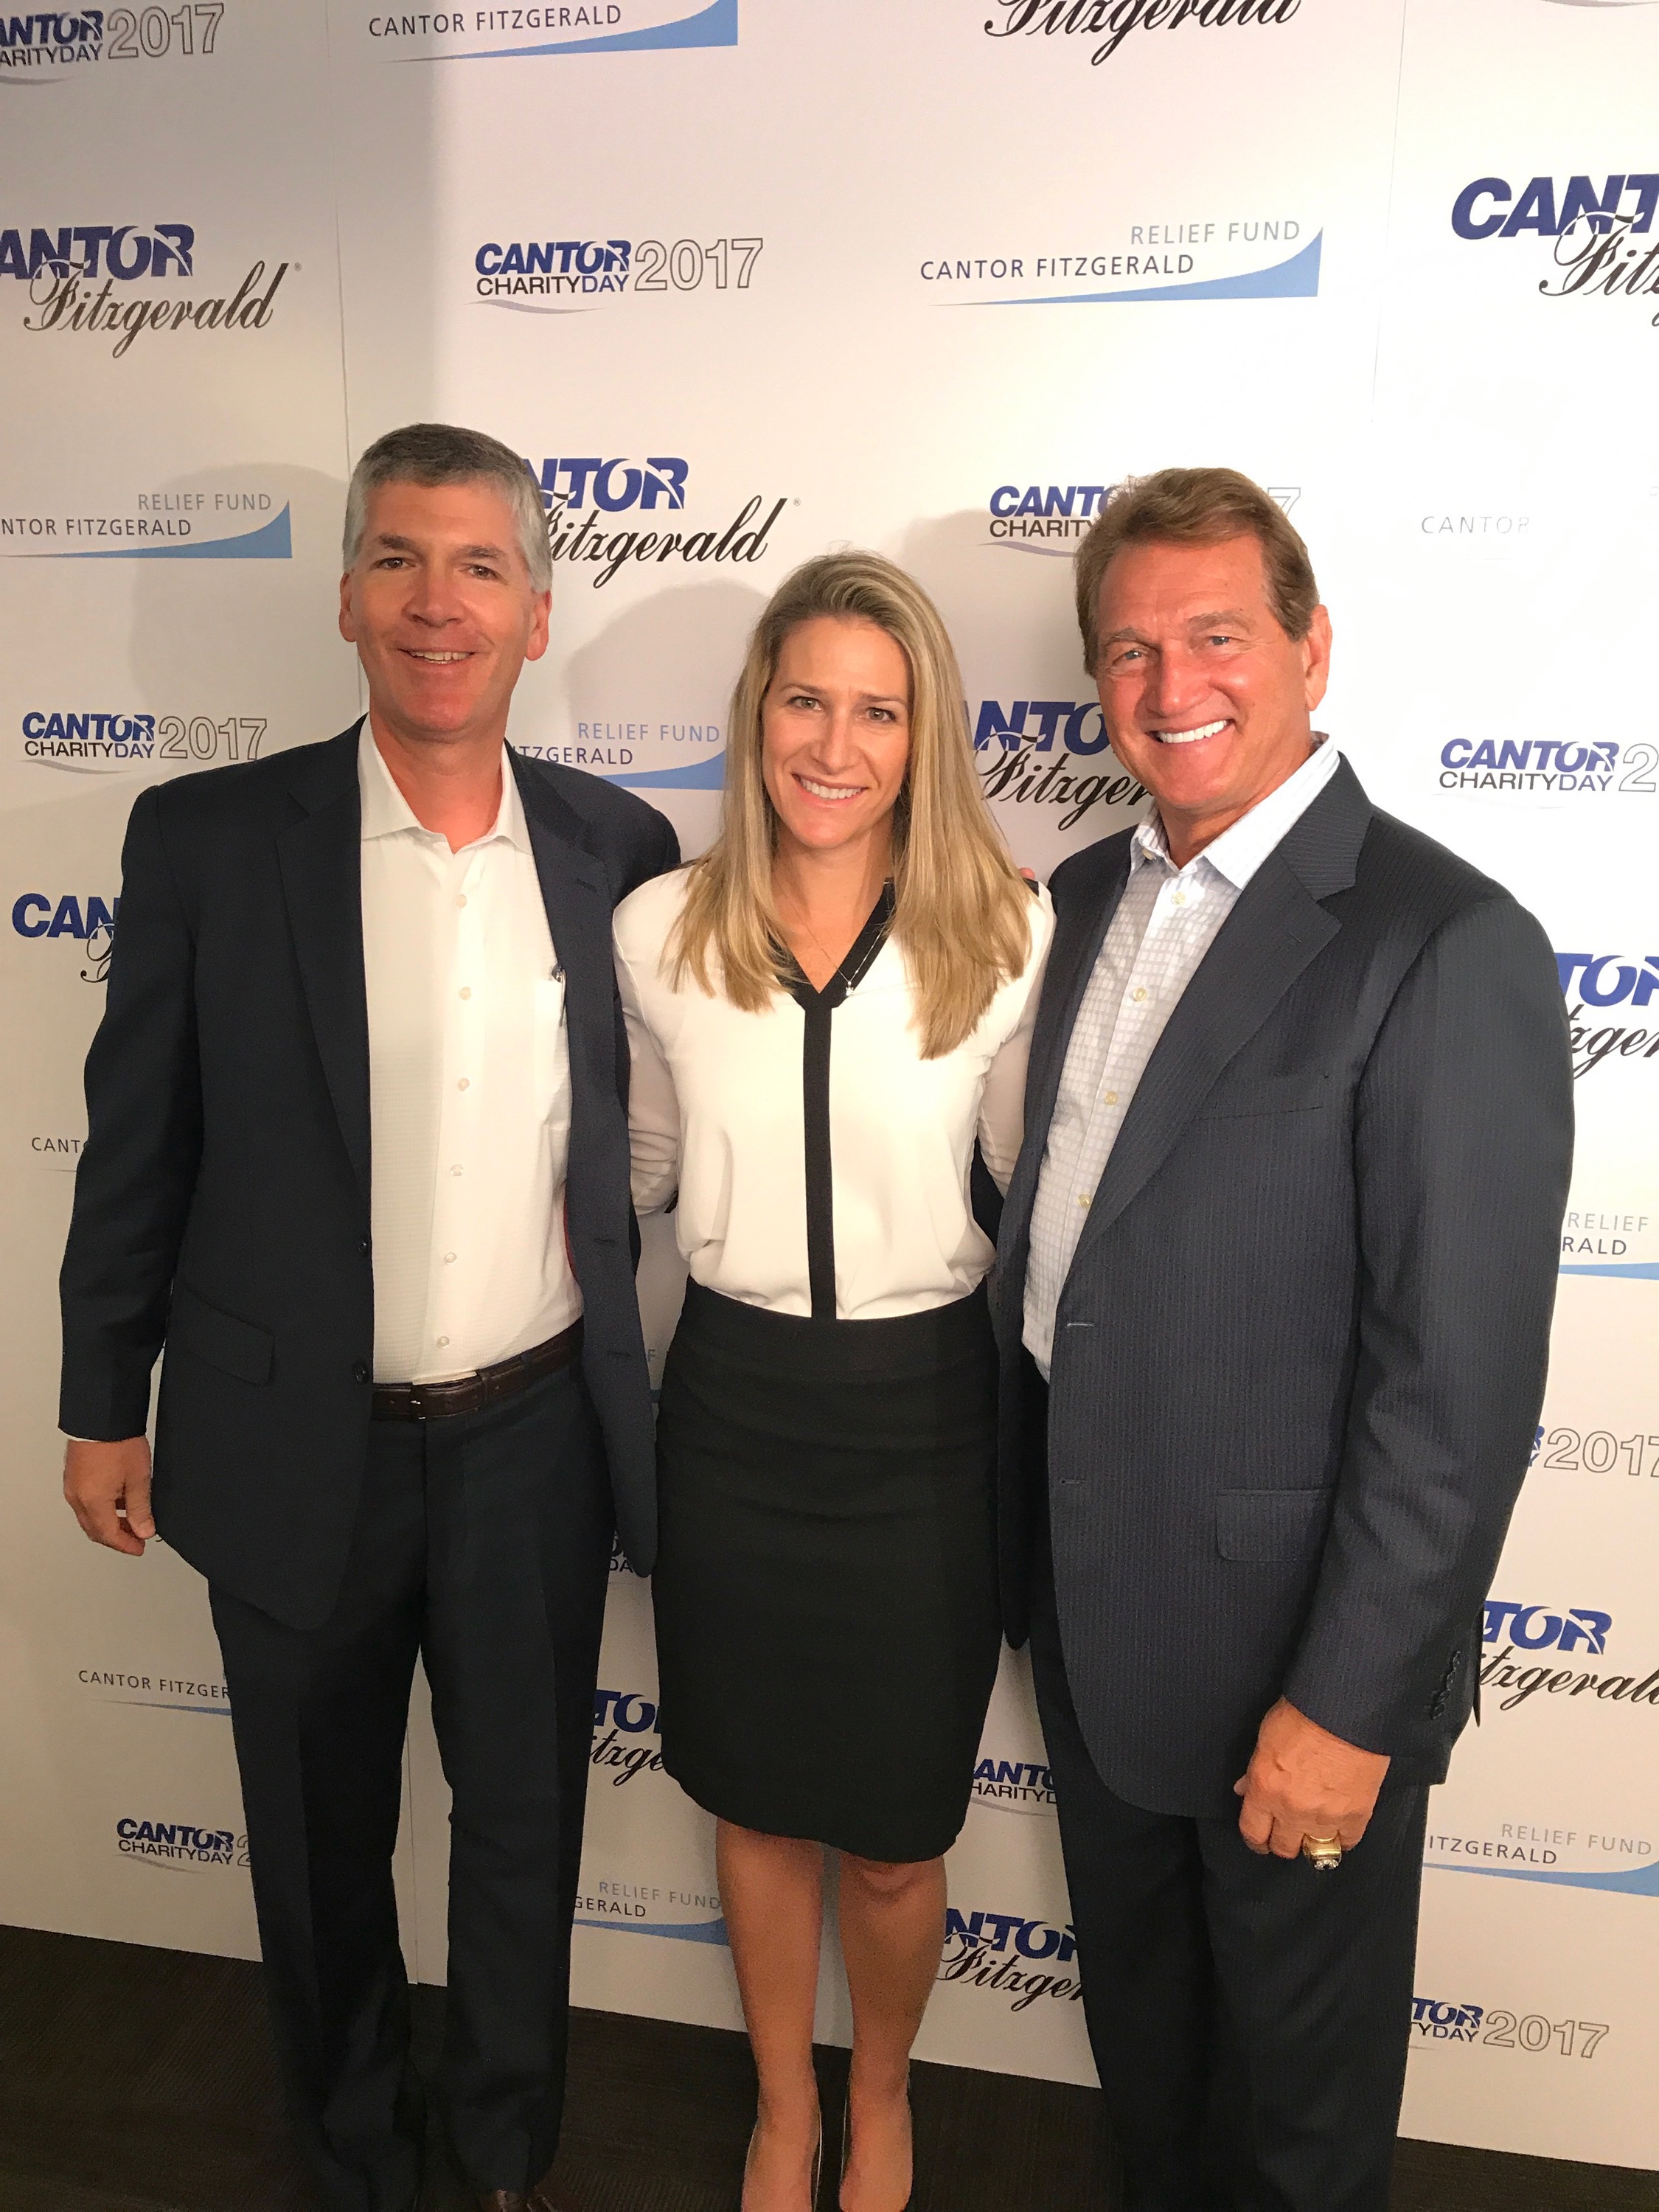 (L to R) Shelters to Shutters' CEO Andy Helmer and Dir of Marketing Kristen Fagley, join Joe Theismann, NFL great as he represents Shelters to Shutters at Cantor Fitzgerald Charity Day 2017.